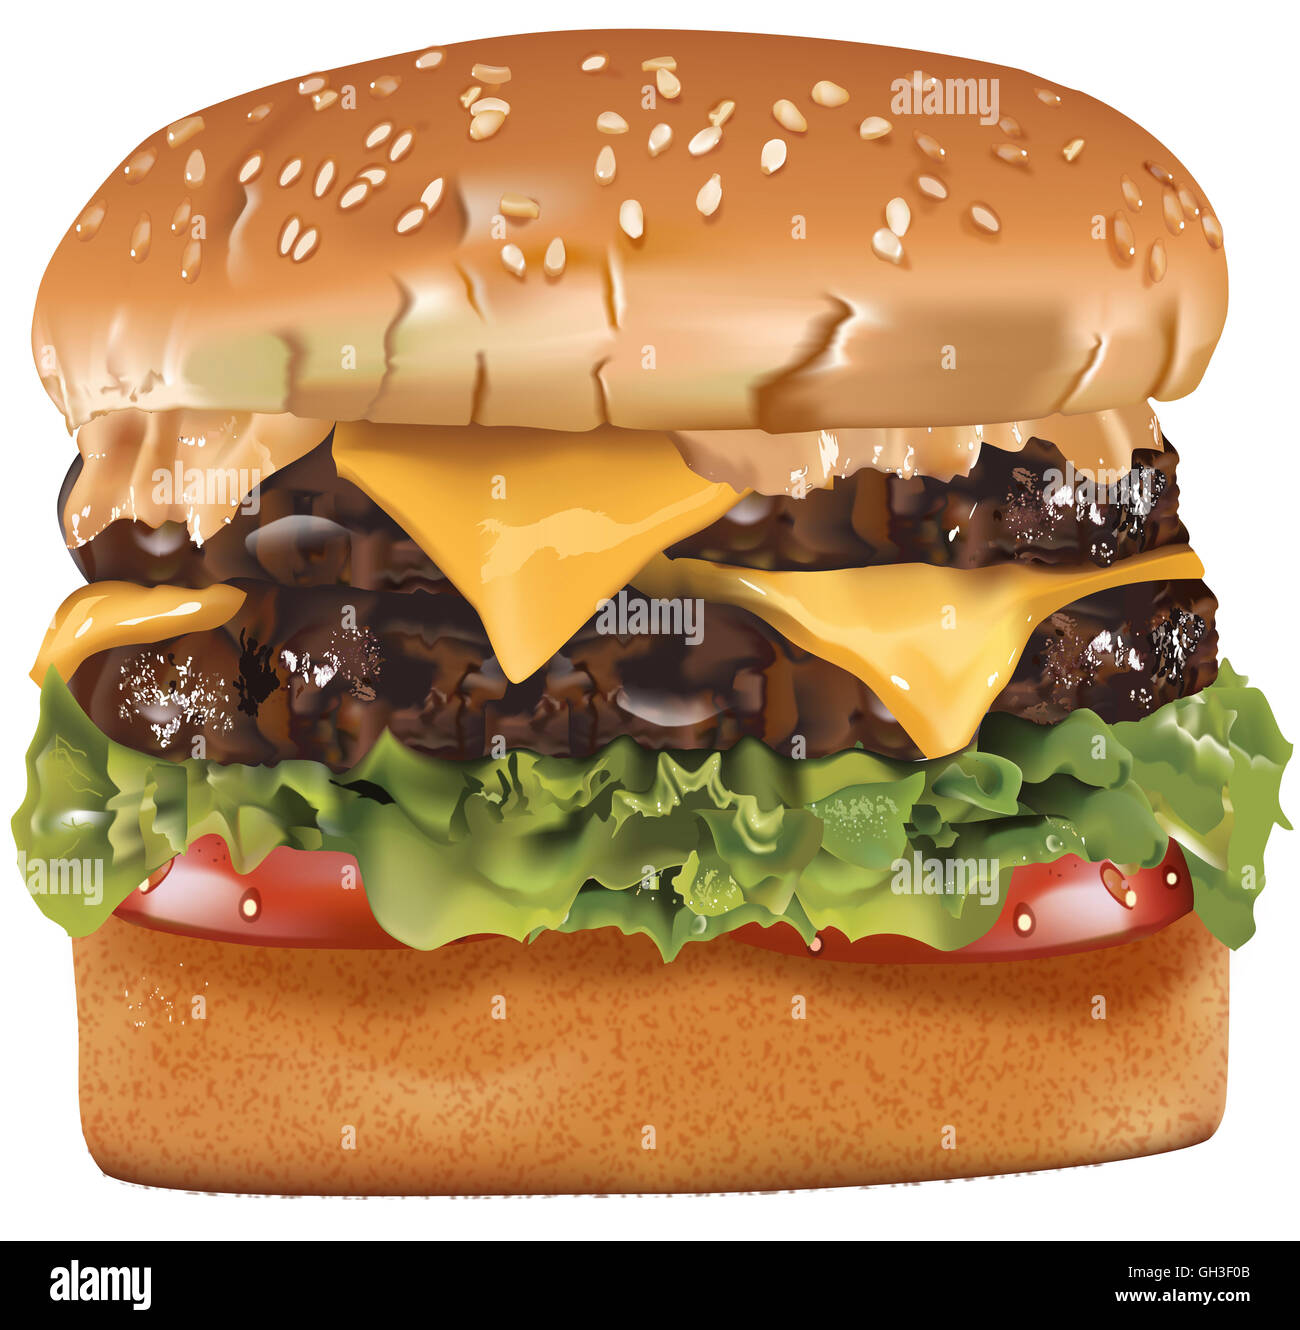 Typical fast food restaurant chain double cheeseburger with tomato slices, lettuce and sauce Stock Photo